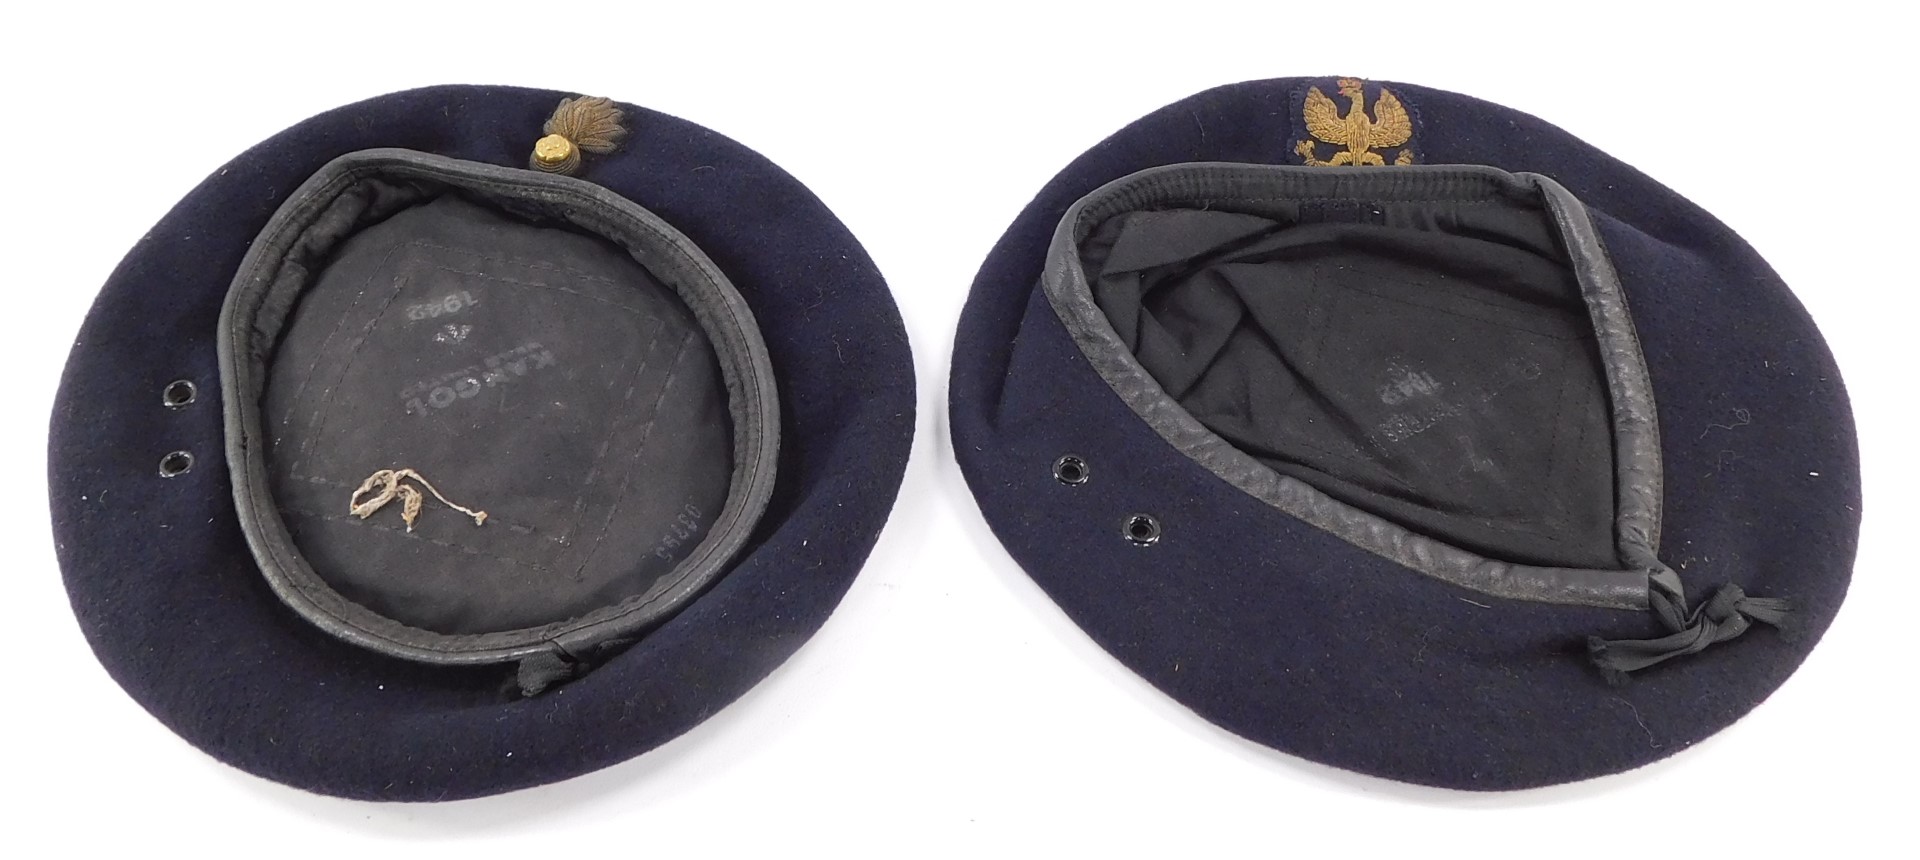 Two British Officer's berets, with Bullion insignia.